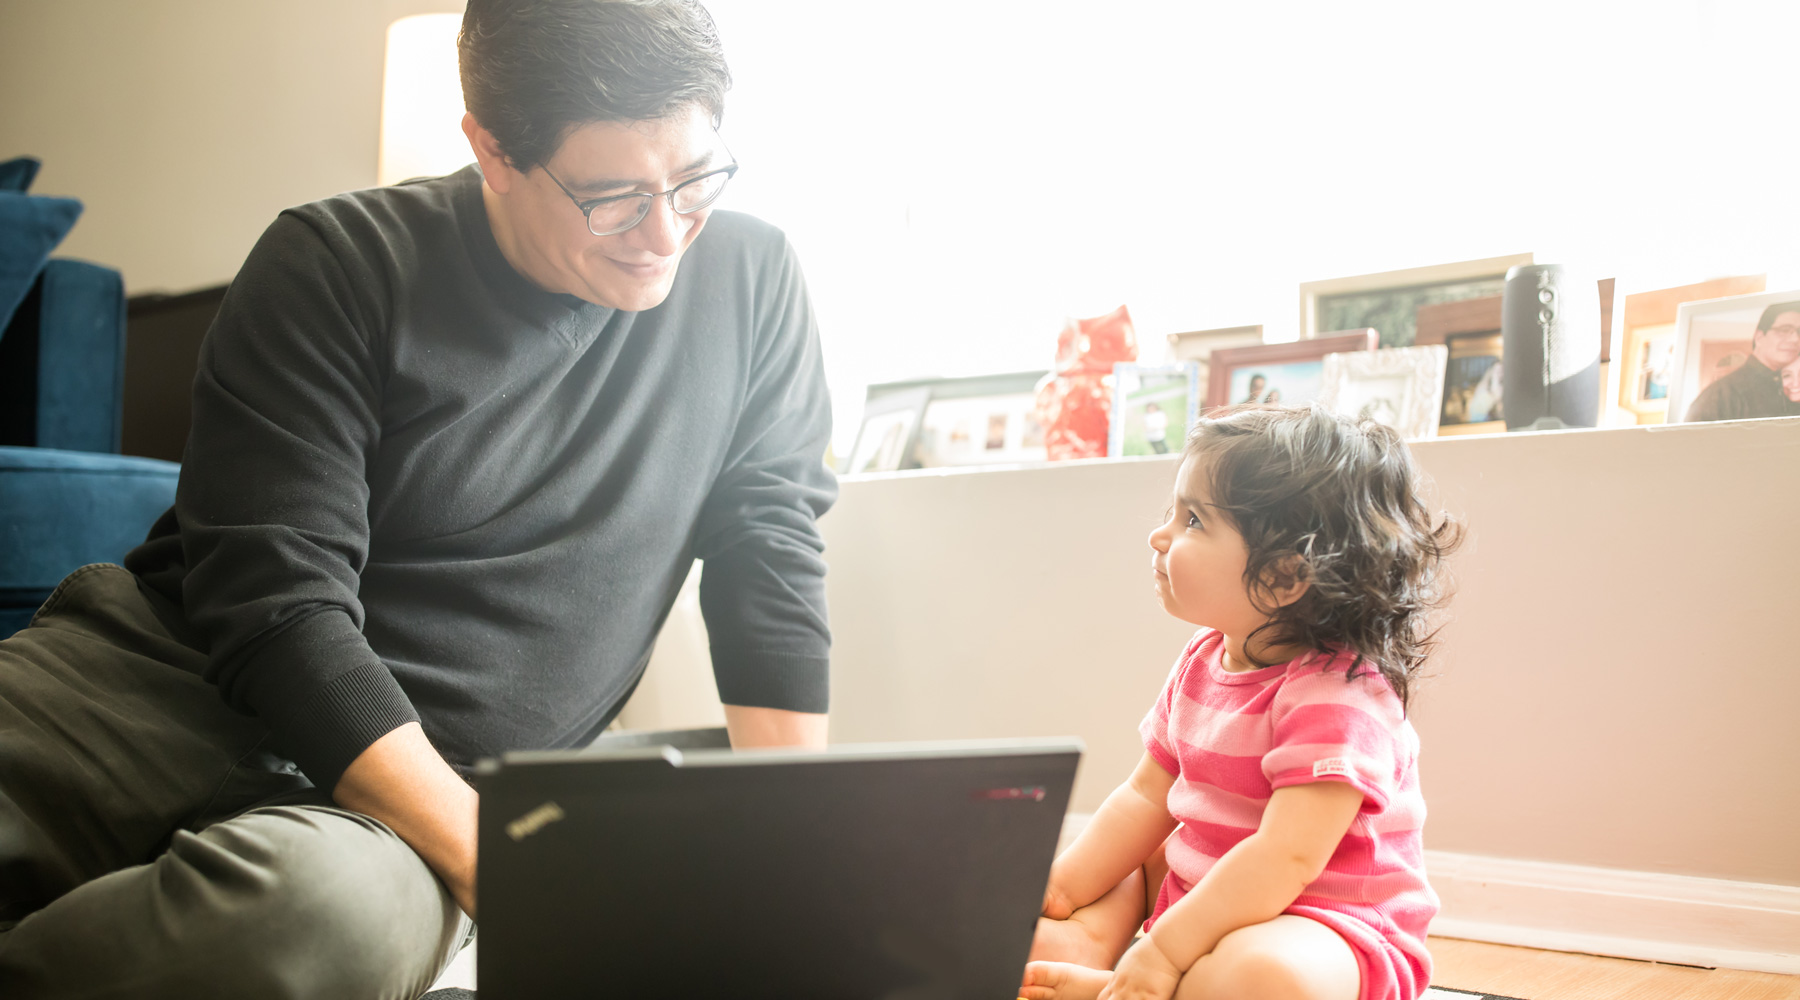 President's Medallion winner Adrian De La Cruz studies at home in Hoffman Estates with his one-year-old child, Mia. (Photo: Lukas Keapproth)